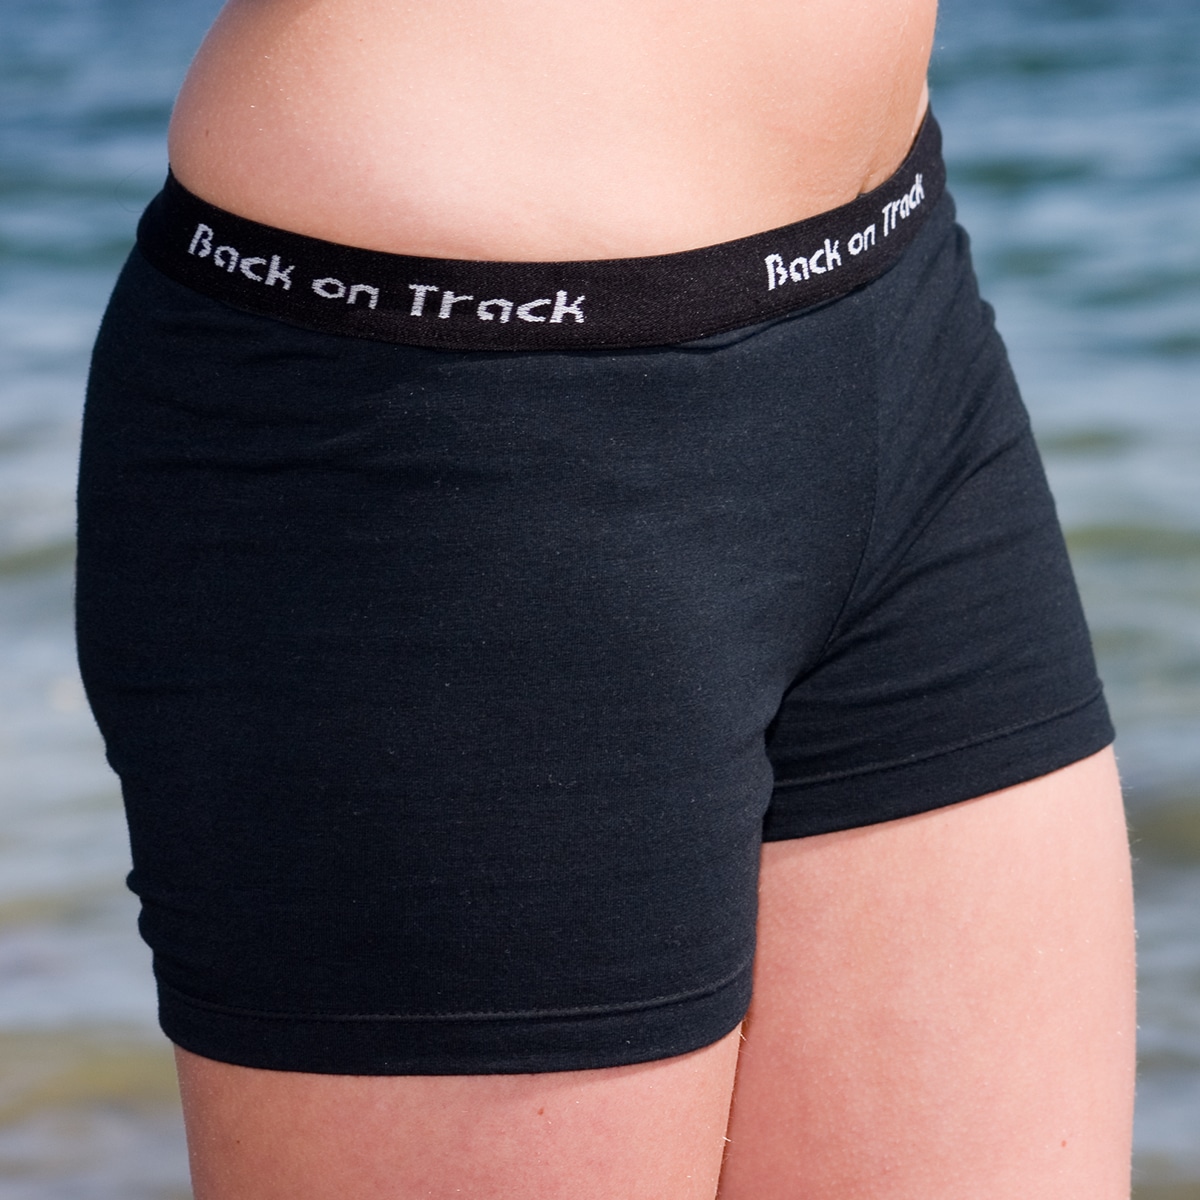 Buy Women's Boxers Online - Great Quality & Affordable Prices